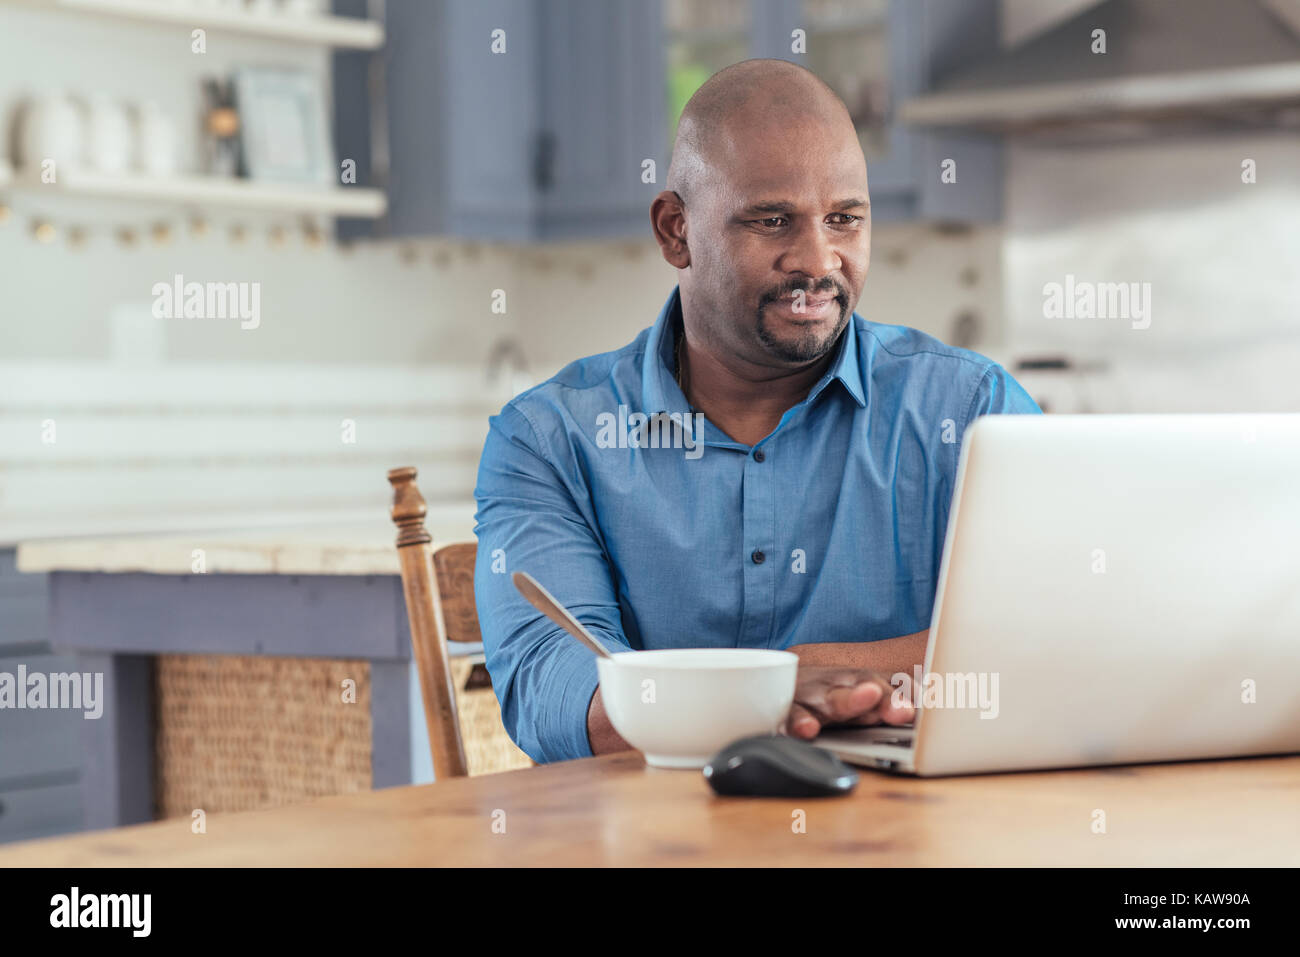 Mature African man using a laptop over breakfast Stock Photo